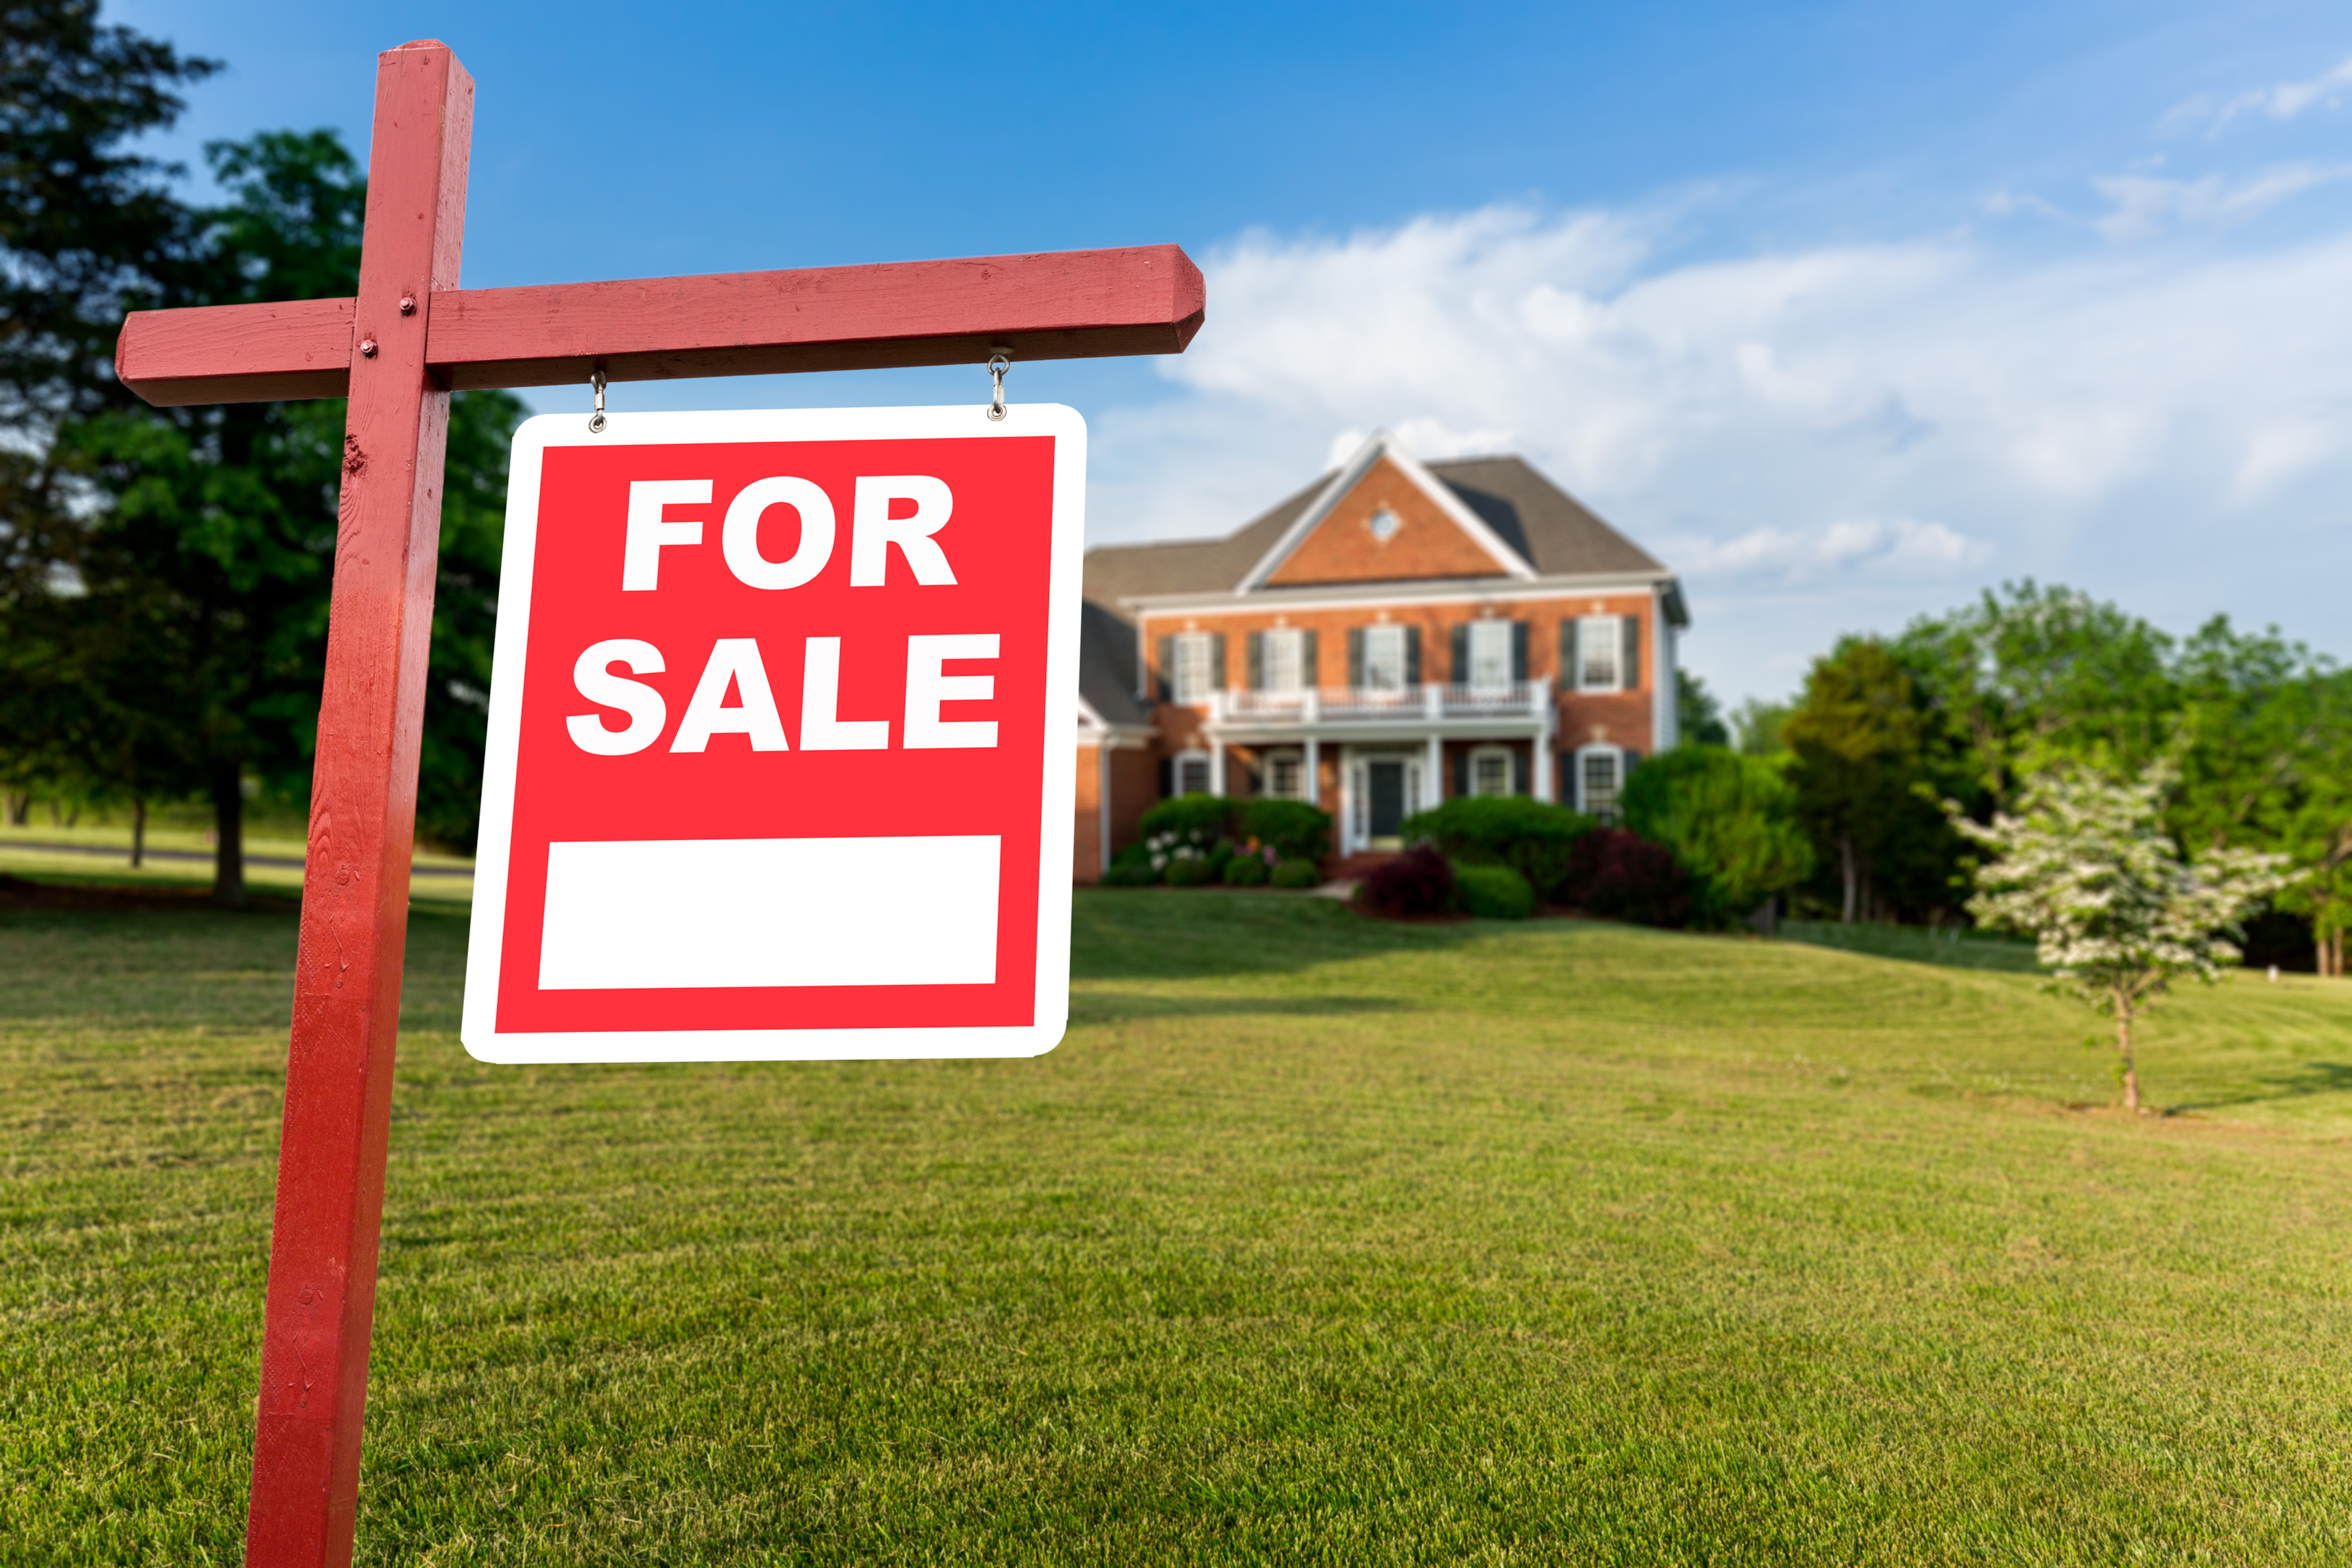 House for sale can interest real estate investors